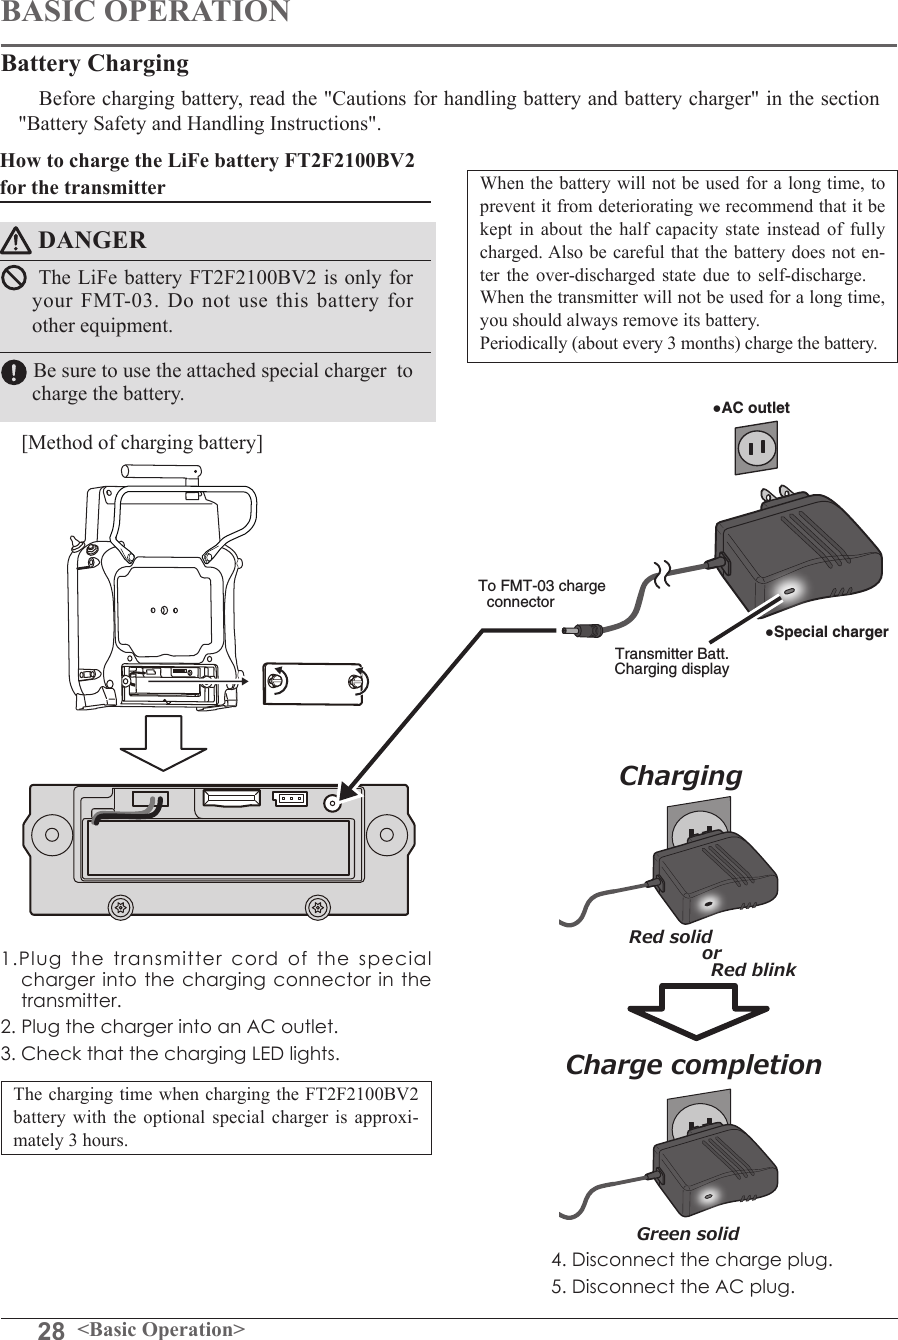 28 &lt;Basic Operation&gt;BASIC OPERATIONHow to charge the LiFe battery FT2F2100BV2 for the transmitterDANGERThe LiFe battery FT2F2100BV2 is only for your FMT-03. Do not use this battery for other equipment.Be sure to use the attached special charger  to charge the battery.[Method of charging battery]Battery ChargingBefore charging battery, read the &quot;Cautions for handling battery and battery charger&quot; in the section &quot;Battery Safety and Handling Instructions&quot;.●Special charger●AC outletTo FMT-03 charge   connectorTransmitter Batt.Charging displayRed solidChargingCharge completionGreen solidRed blinkor1.Plug the transmitter cord of the special charger into the charging connector in the transmitter. 2. Plug the charger into an AC outlet. 3. Check that the charging LED lights. When the battery will not be used for a long time, to prevent it from deteriorating we recommend that it be kept in about the half capacity state instead of fully charged. Also be careful that the battery does not en-ter the over-discharged state due to self-discharge.　When the transmitter will not be used for a long time, you should always remove its battery. Periodically (about every 3 months) charge the battery.The charging time when charging the FT2F2100BV2 battery with the optional special charger is approxi-mately 3 hours. 4. Disconnect the charge plug.5. Disconnect the AC plug.